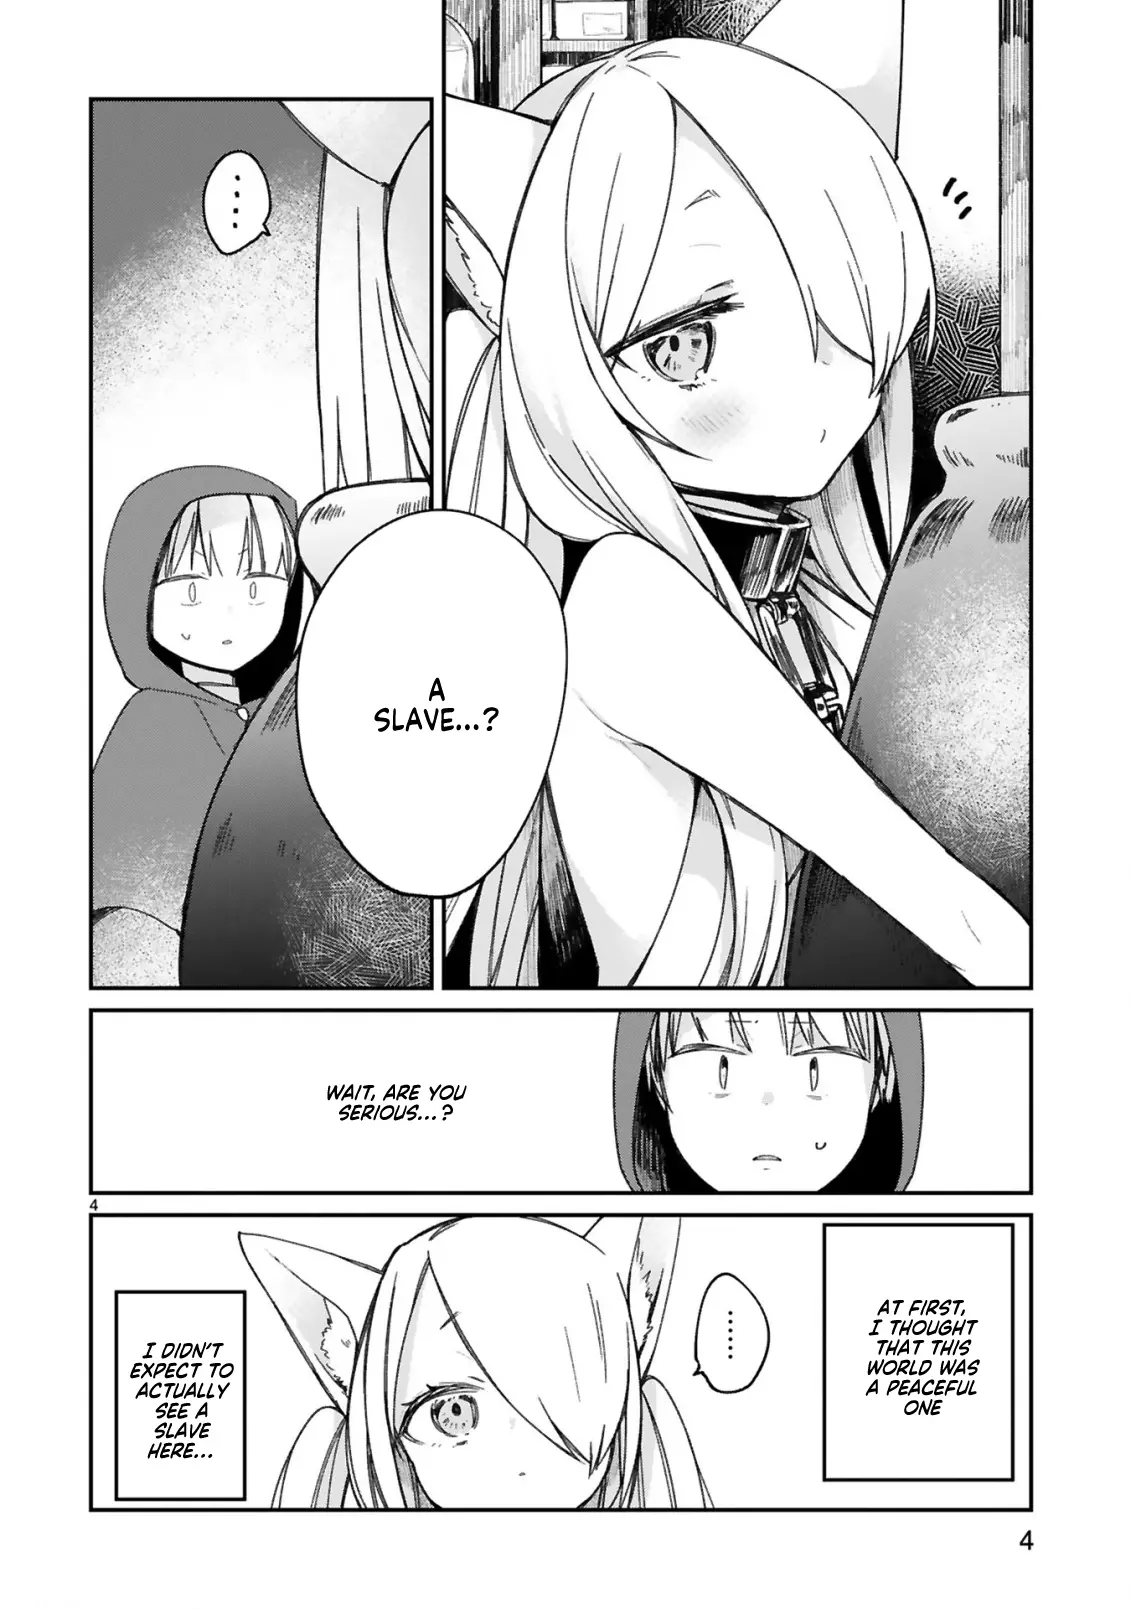 I Was Summoned By The Demon Lord, But I Can't Understand Her Language - 16 page 6